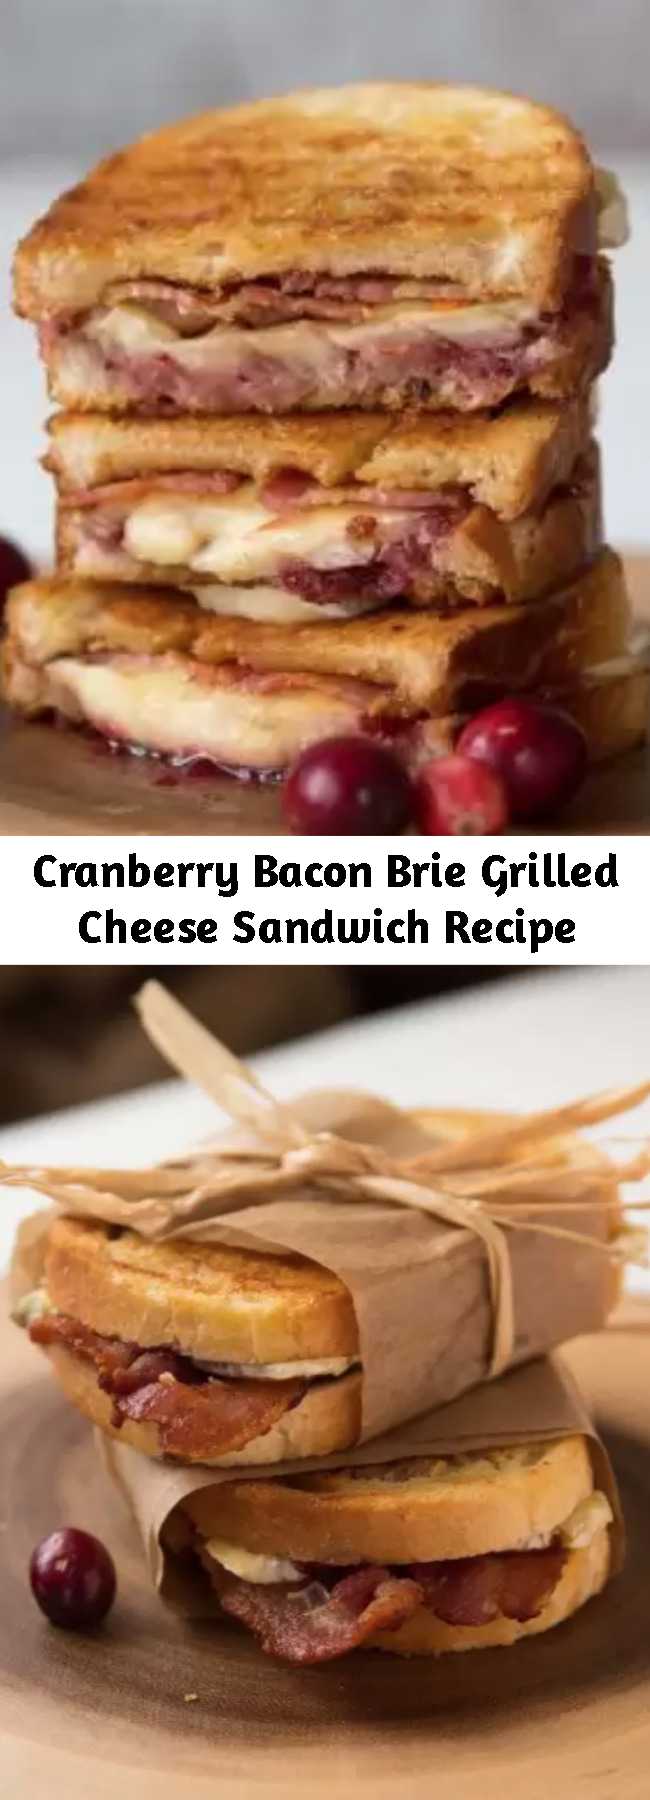 Cranberry Bacon Brie Grilled Cheese Sandwich Recipe - Cranberry Bacon Brie Grilled Cheese Sandwich - The perfect combination celebrating the beauty of salty and sweet. The only way you'll ever want to use up leftover cranberry sauce!  #leftovers #cranberry #brie #cheese #grilledcheese #bacon